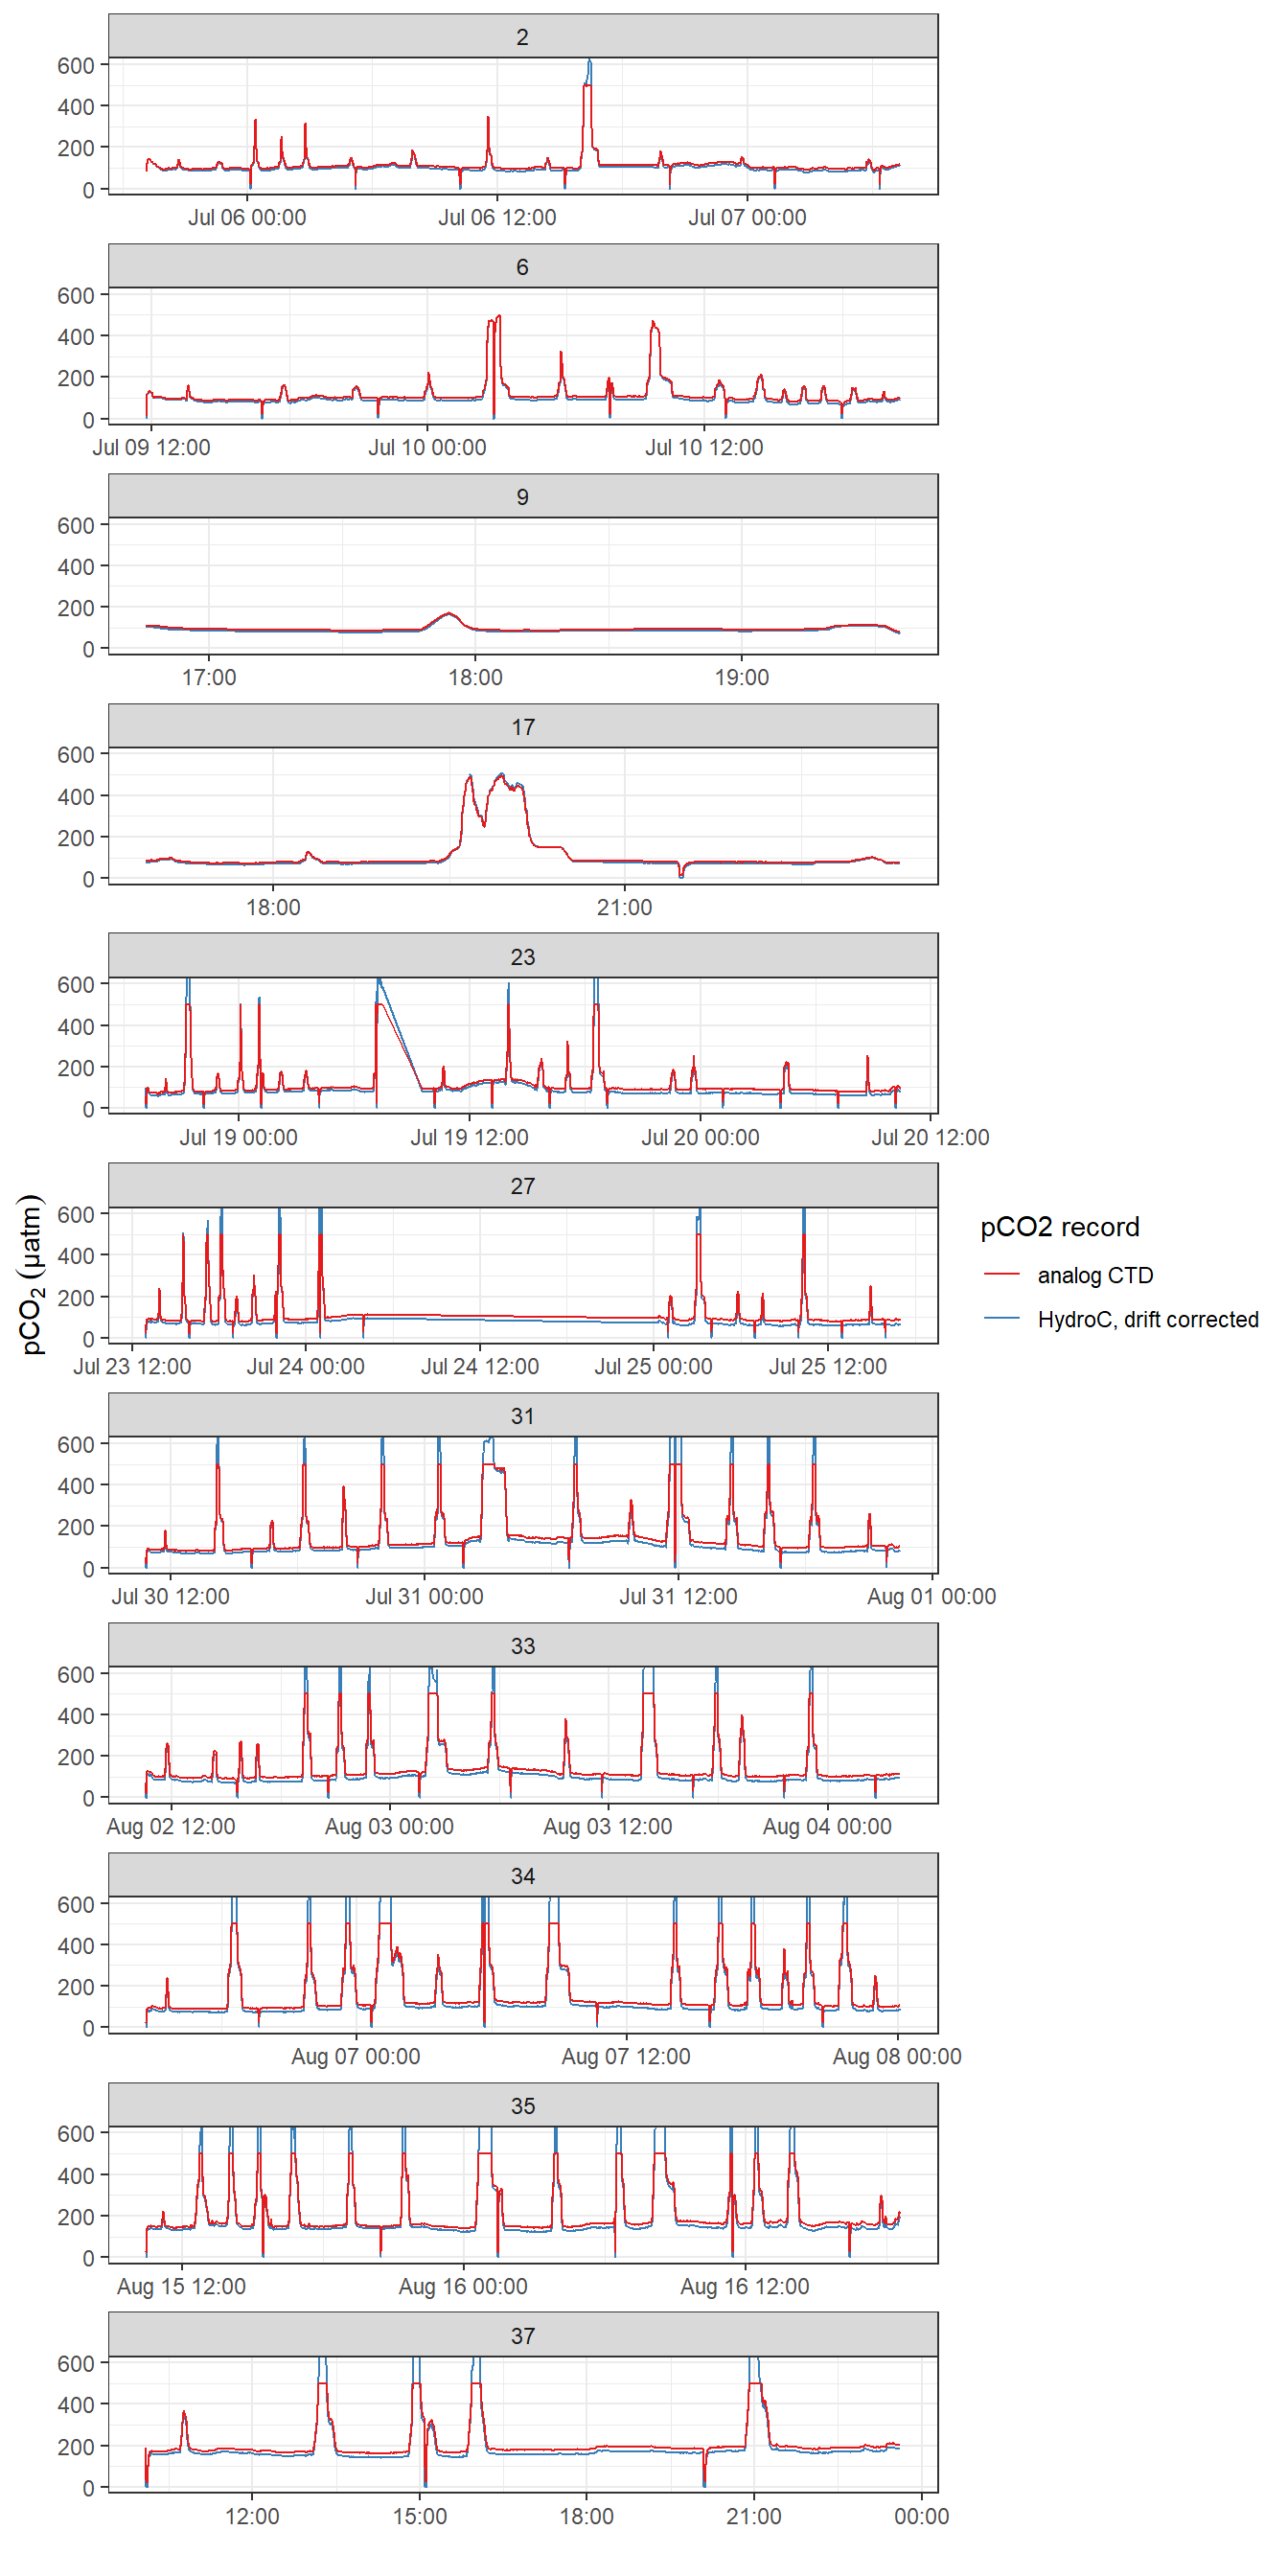 pCO~2~ record after interpolation to HydroC timestamp (analog output from HydroC and drift corrected data provided by Contos). ID refers to the starting date of each cruise. Please note that pCO2_analog measurement range is technically restricted to 100-500  µatm. Zeroing periods are included.